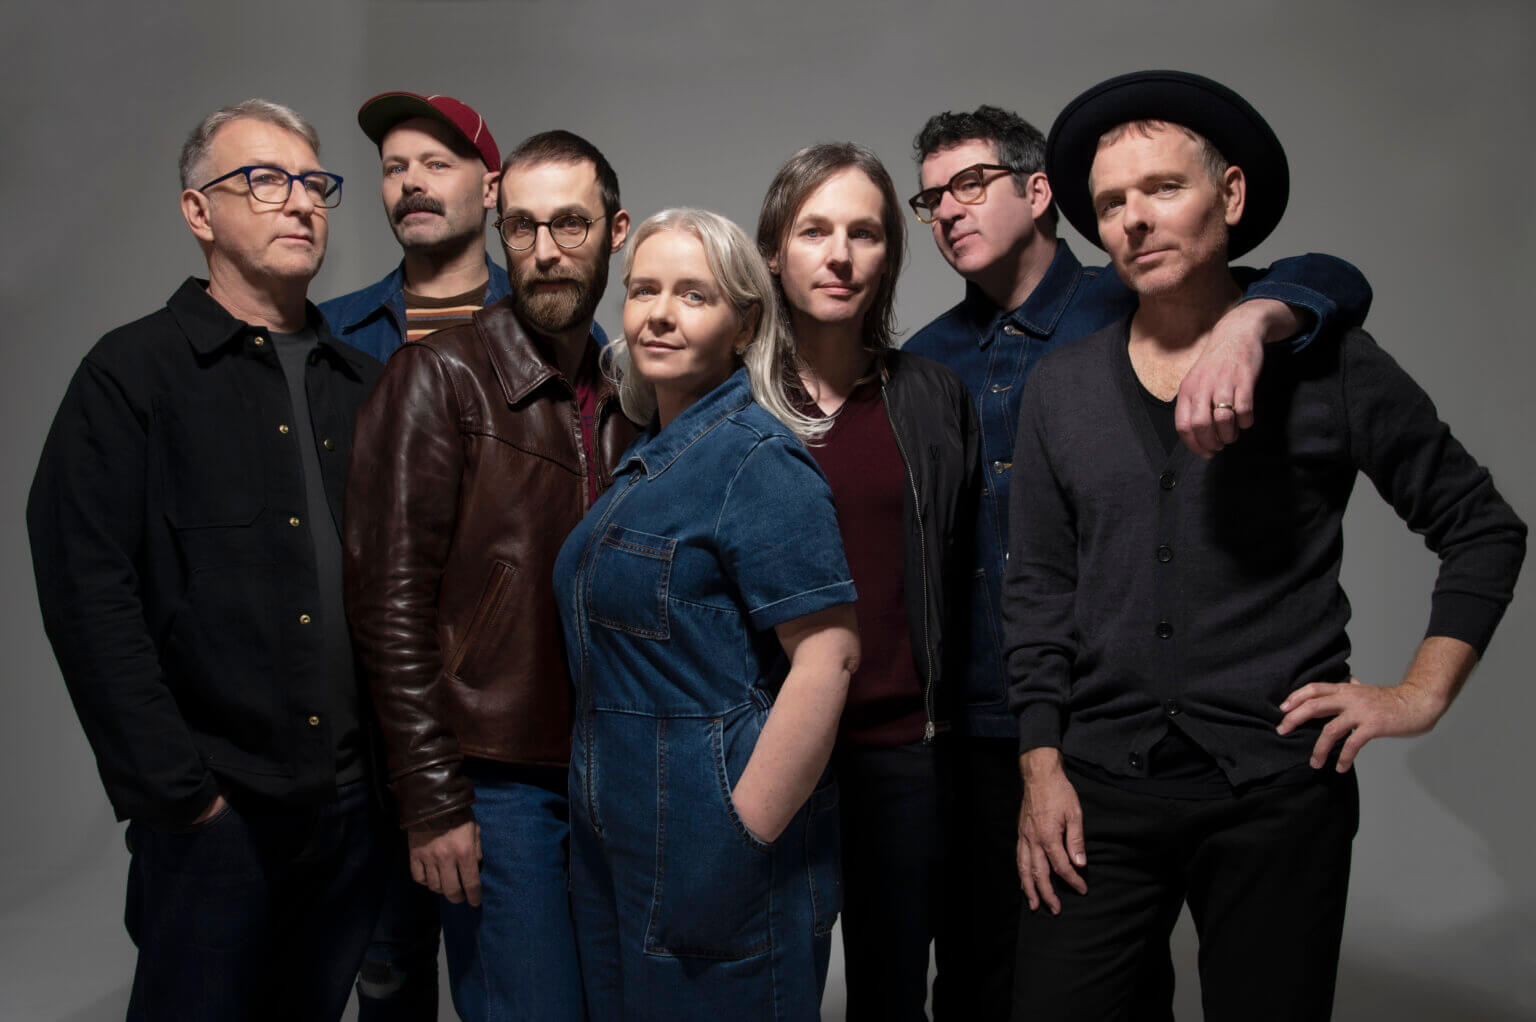 Belle and Sebastian announce new album Late Developers. The indie Scottish band's LP drops on January 13, 2023 via Matador Records